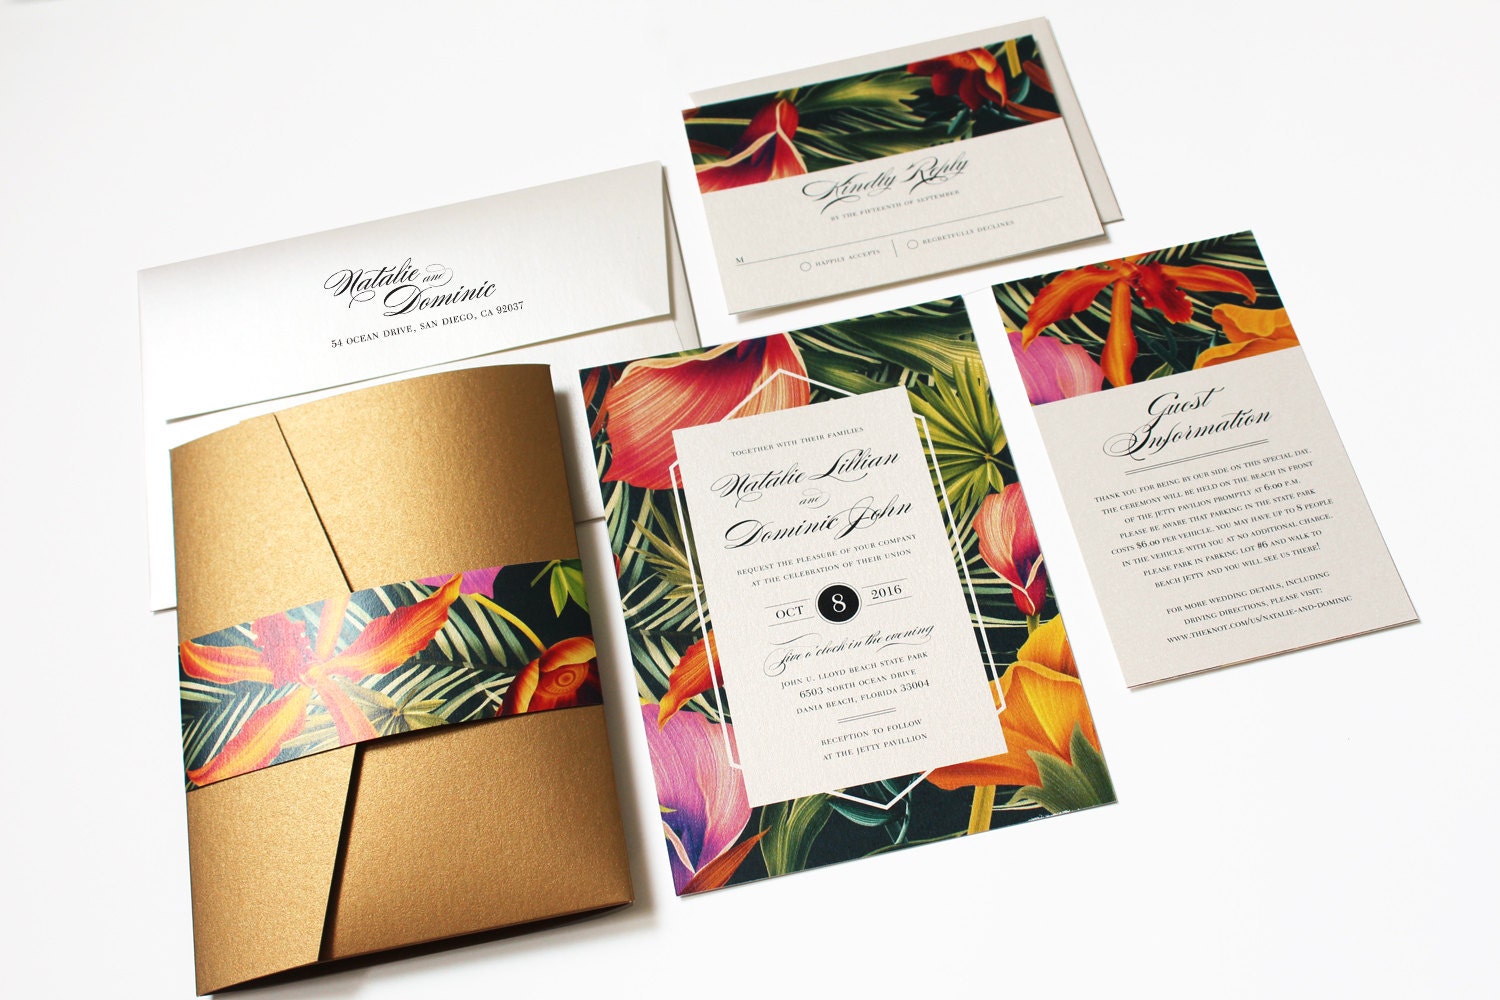 5x7 Metallic Gold Floral & Forest Green Wedding Invitation with